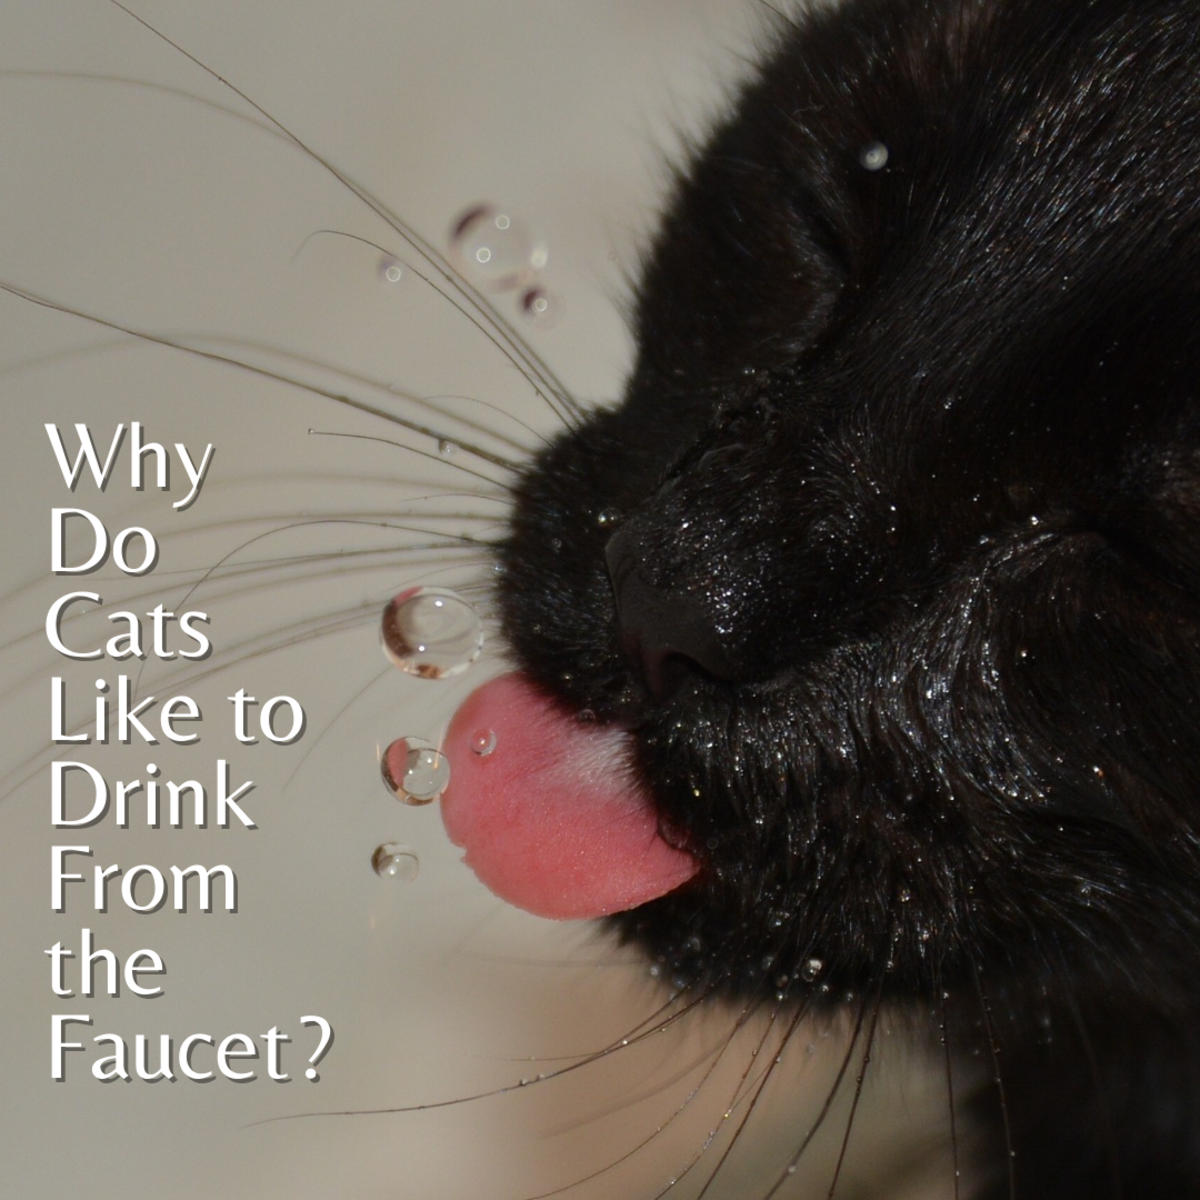 Why Do Cats Like Drinking From the Water Faucet?